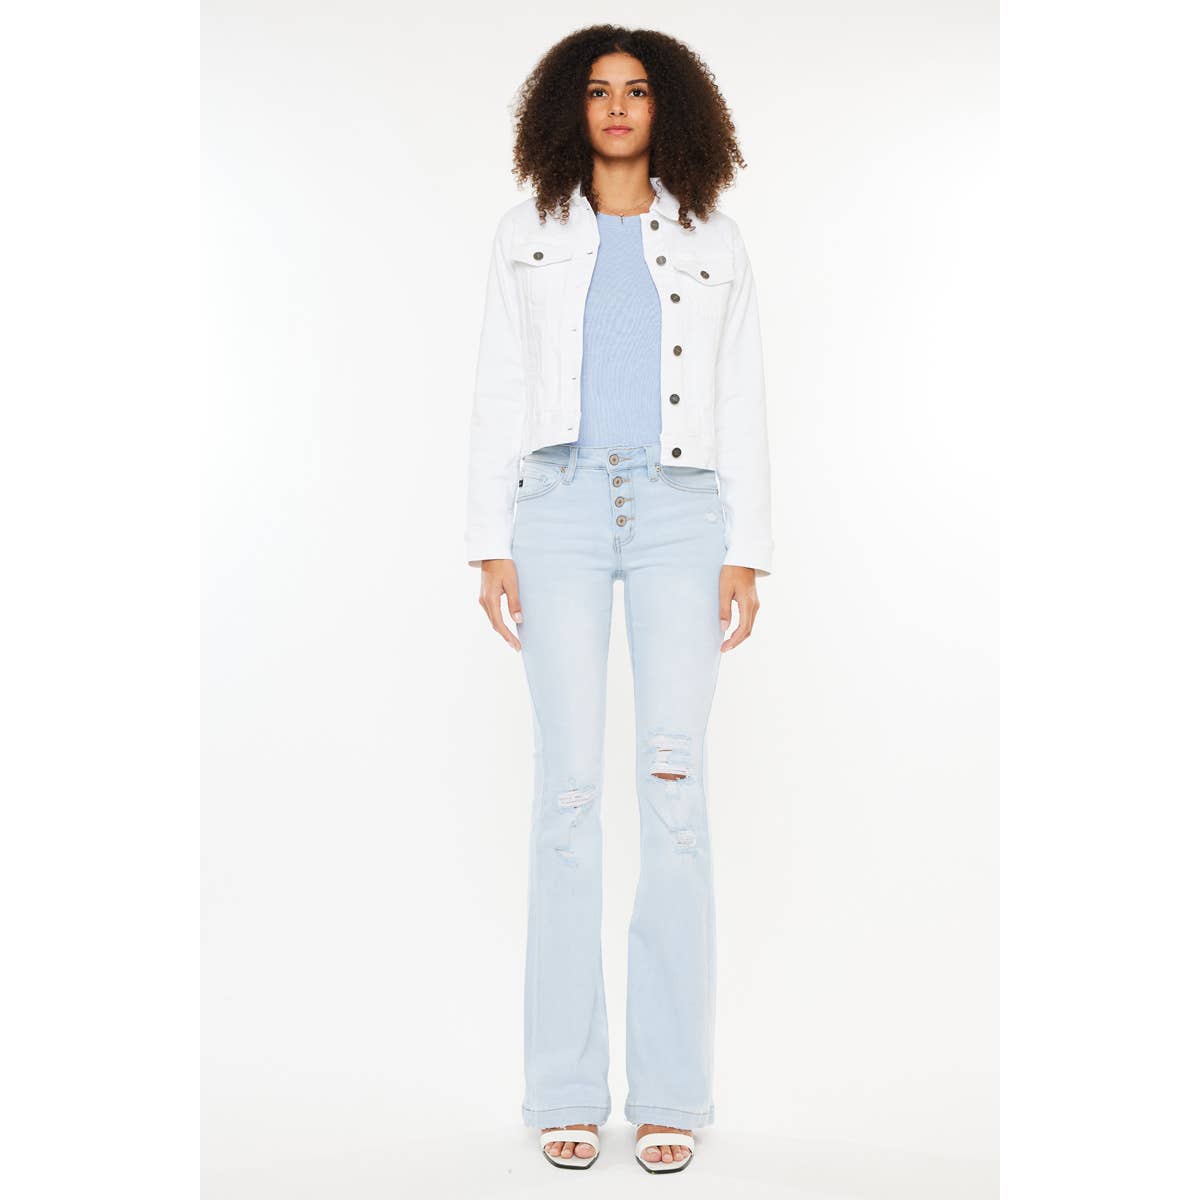 White Denim Jacket by Kan Can USA--Lemons and Limes Boutique